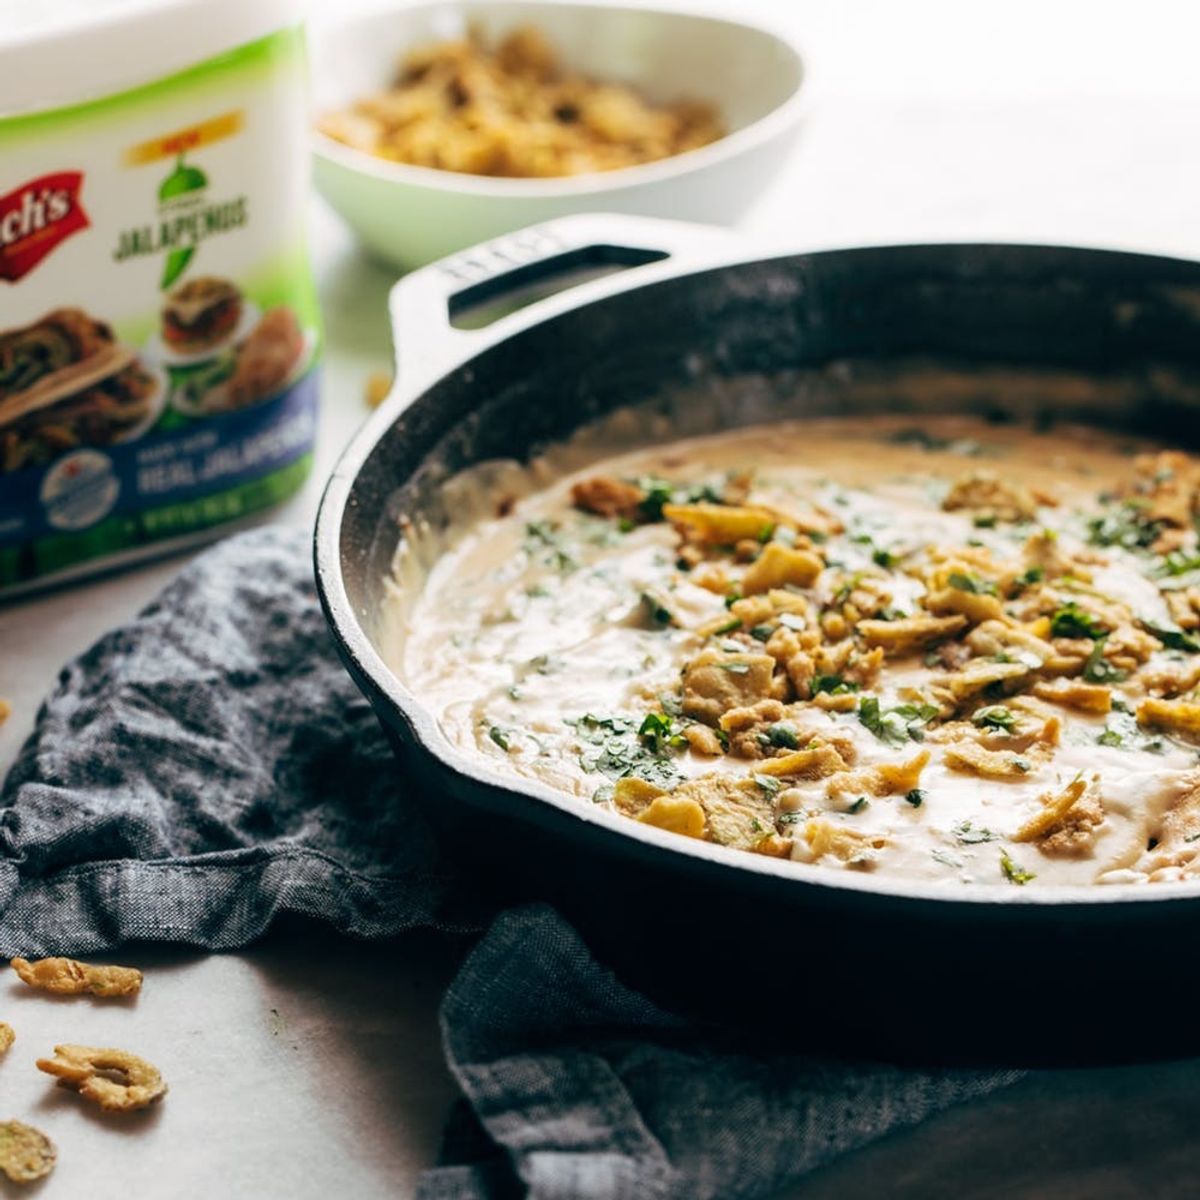 Satisfy Your Queso Craving With This Crispy Jalapeño Spinach Queso Recipe